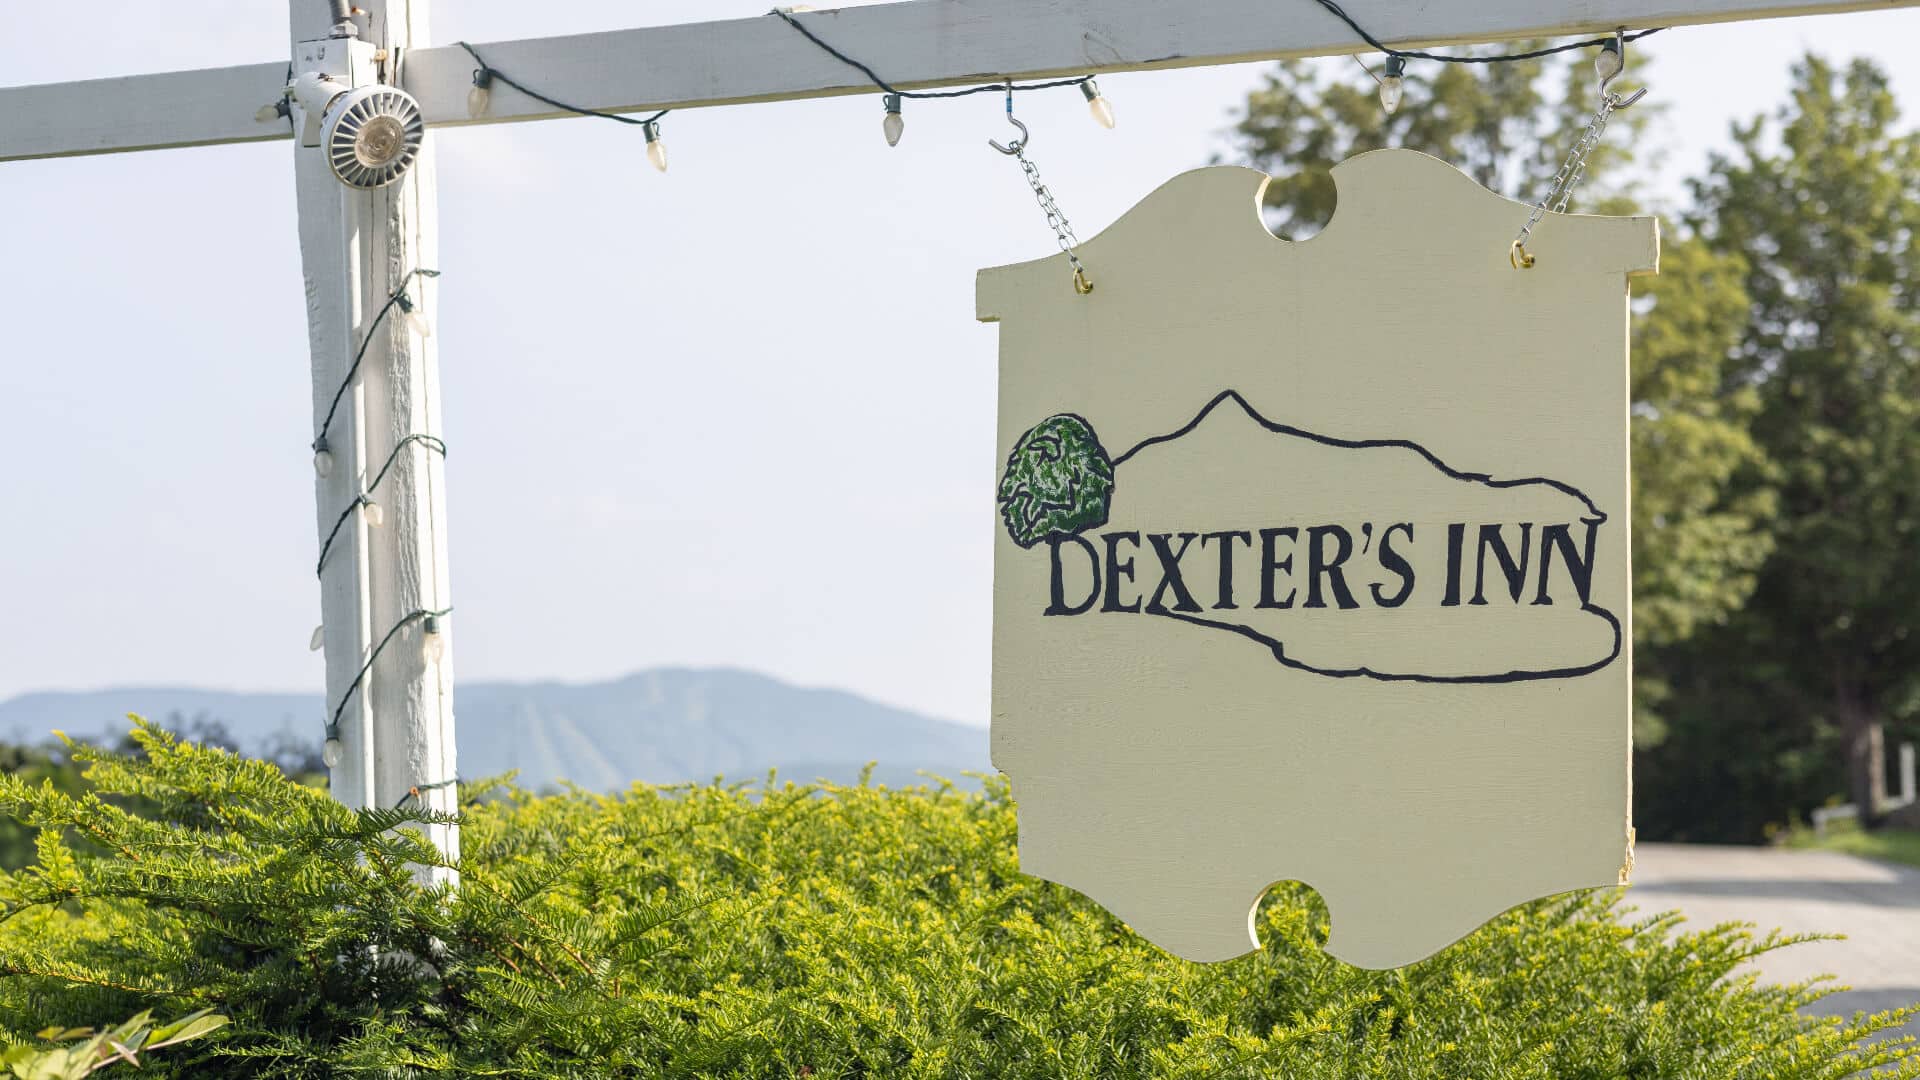 A yellow sign that say Dexter's Inn in Green lettering with mountains in the background